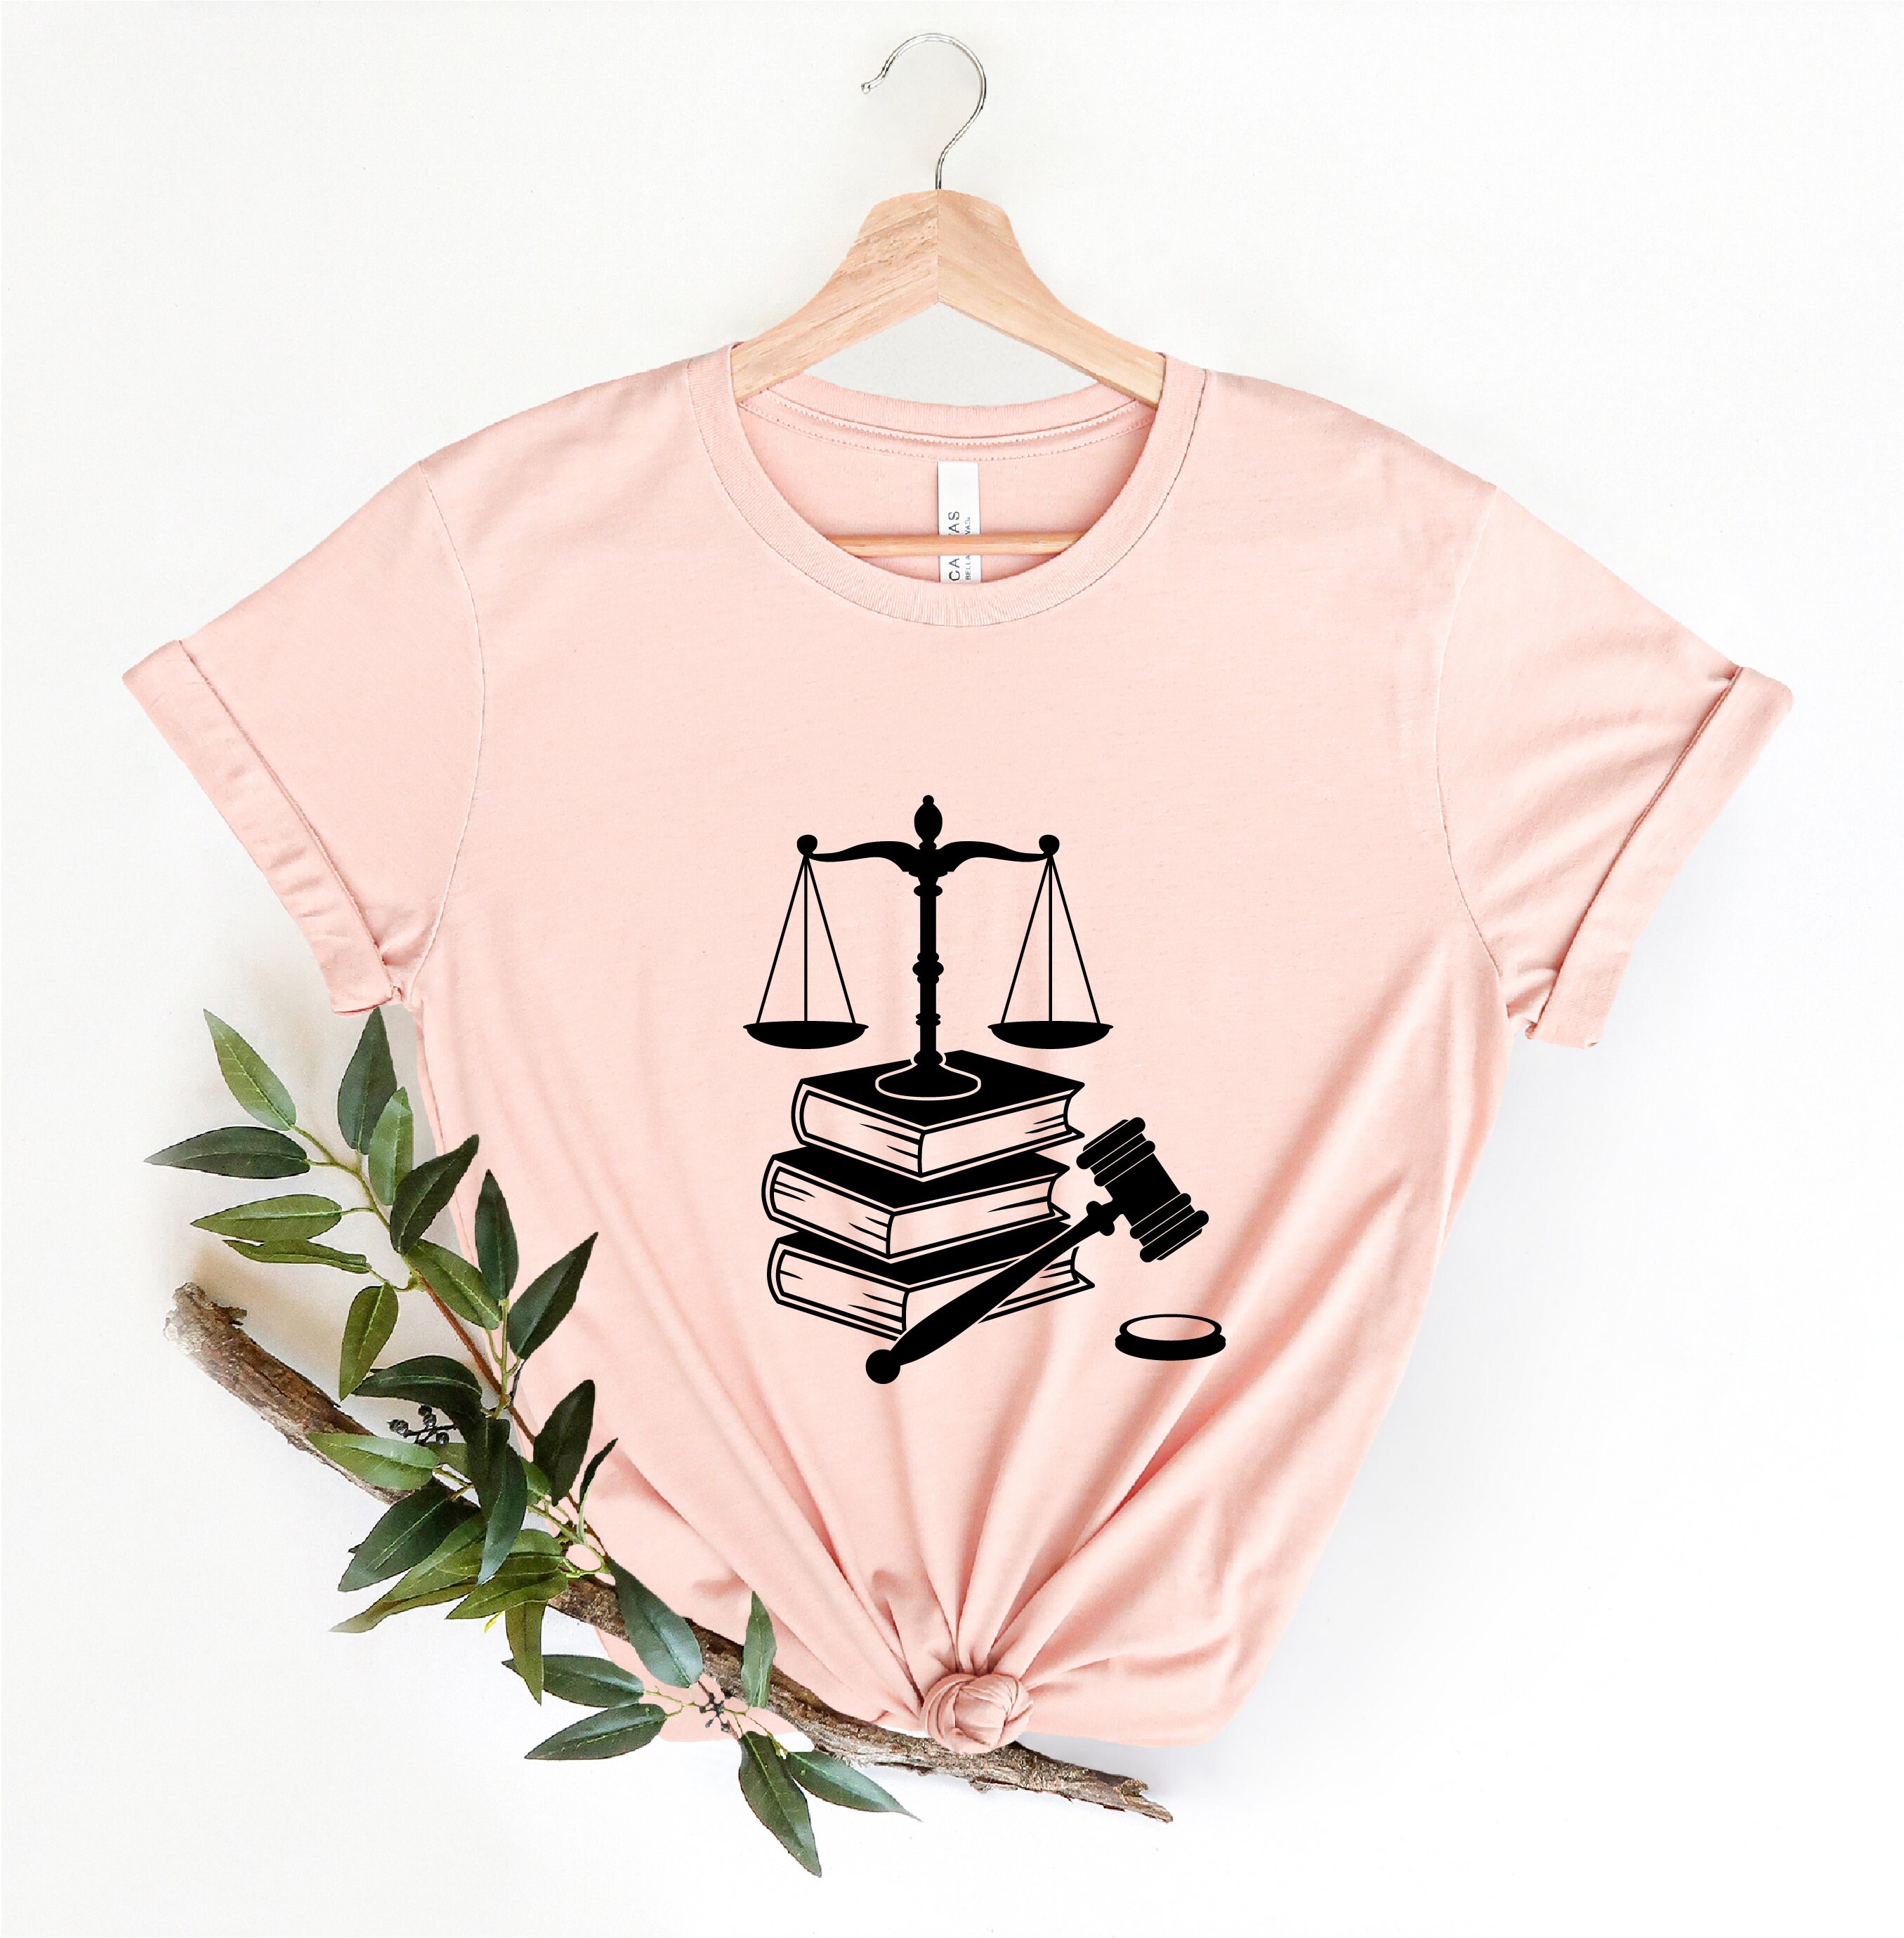 JUSTICE FOR BARB Shirt - Stranger Things Style - Funny's Shirt On